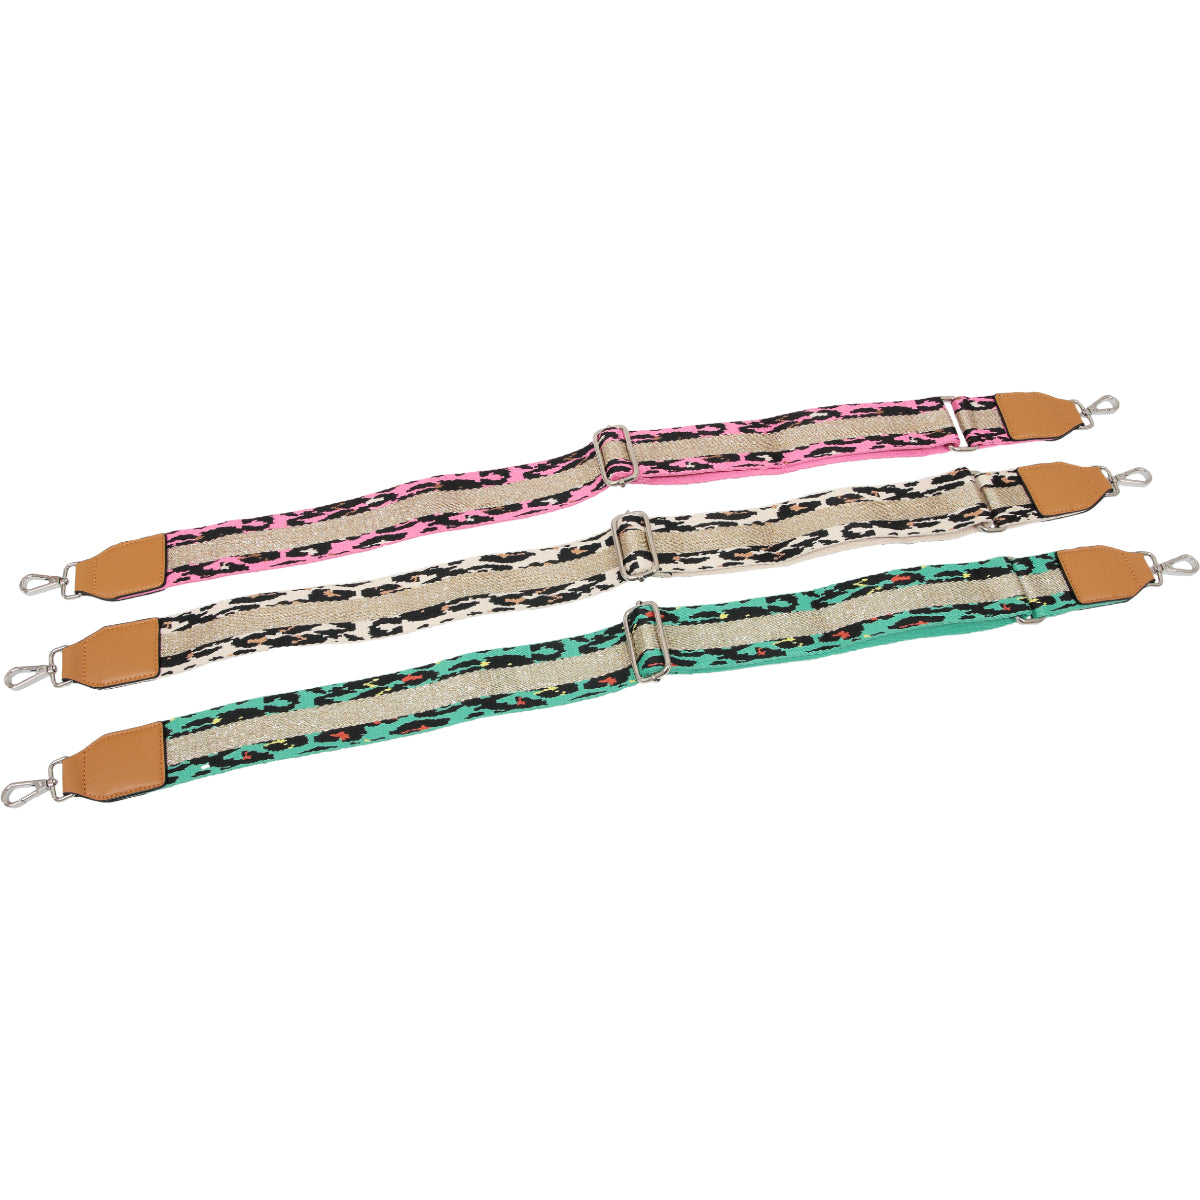 Animal Weave Bag Strap: Change up your bag without the stress of moving all the contents. Switch out your strap to one of our funky adjustable bag straps
Features:

Animal weave edge with g - Ciao Bella Dresses 